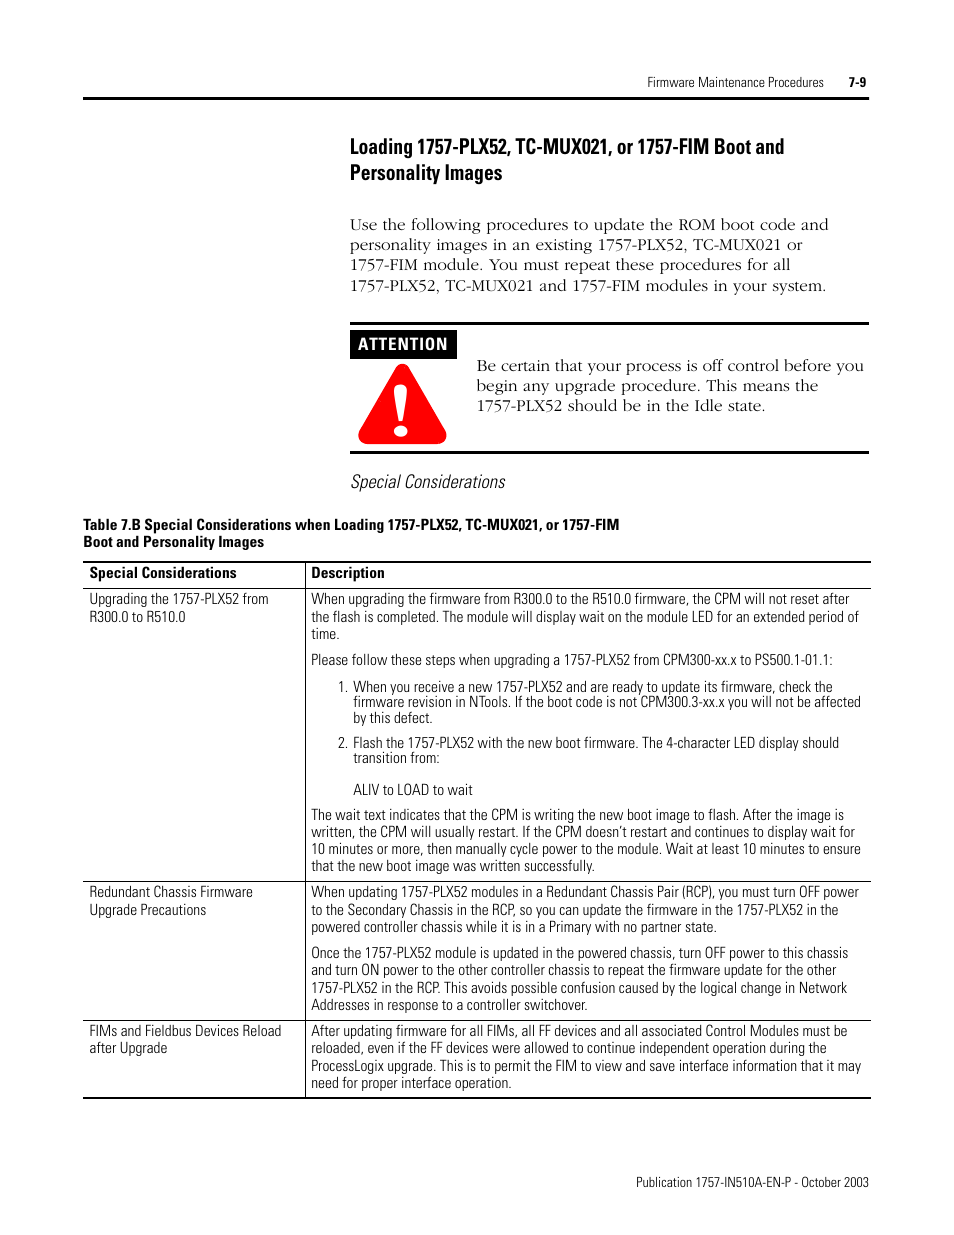 Rockwell Automation 1757-SWKIT5100 ProcessLogix R510.0 Installation and Upgrade Guide User Manual | Page 193 / 271